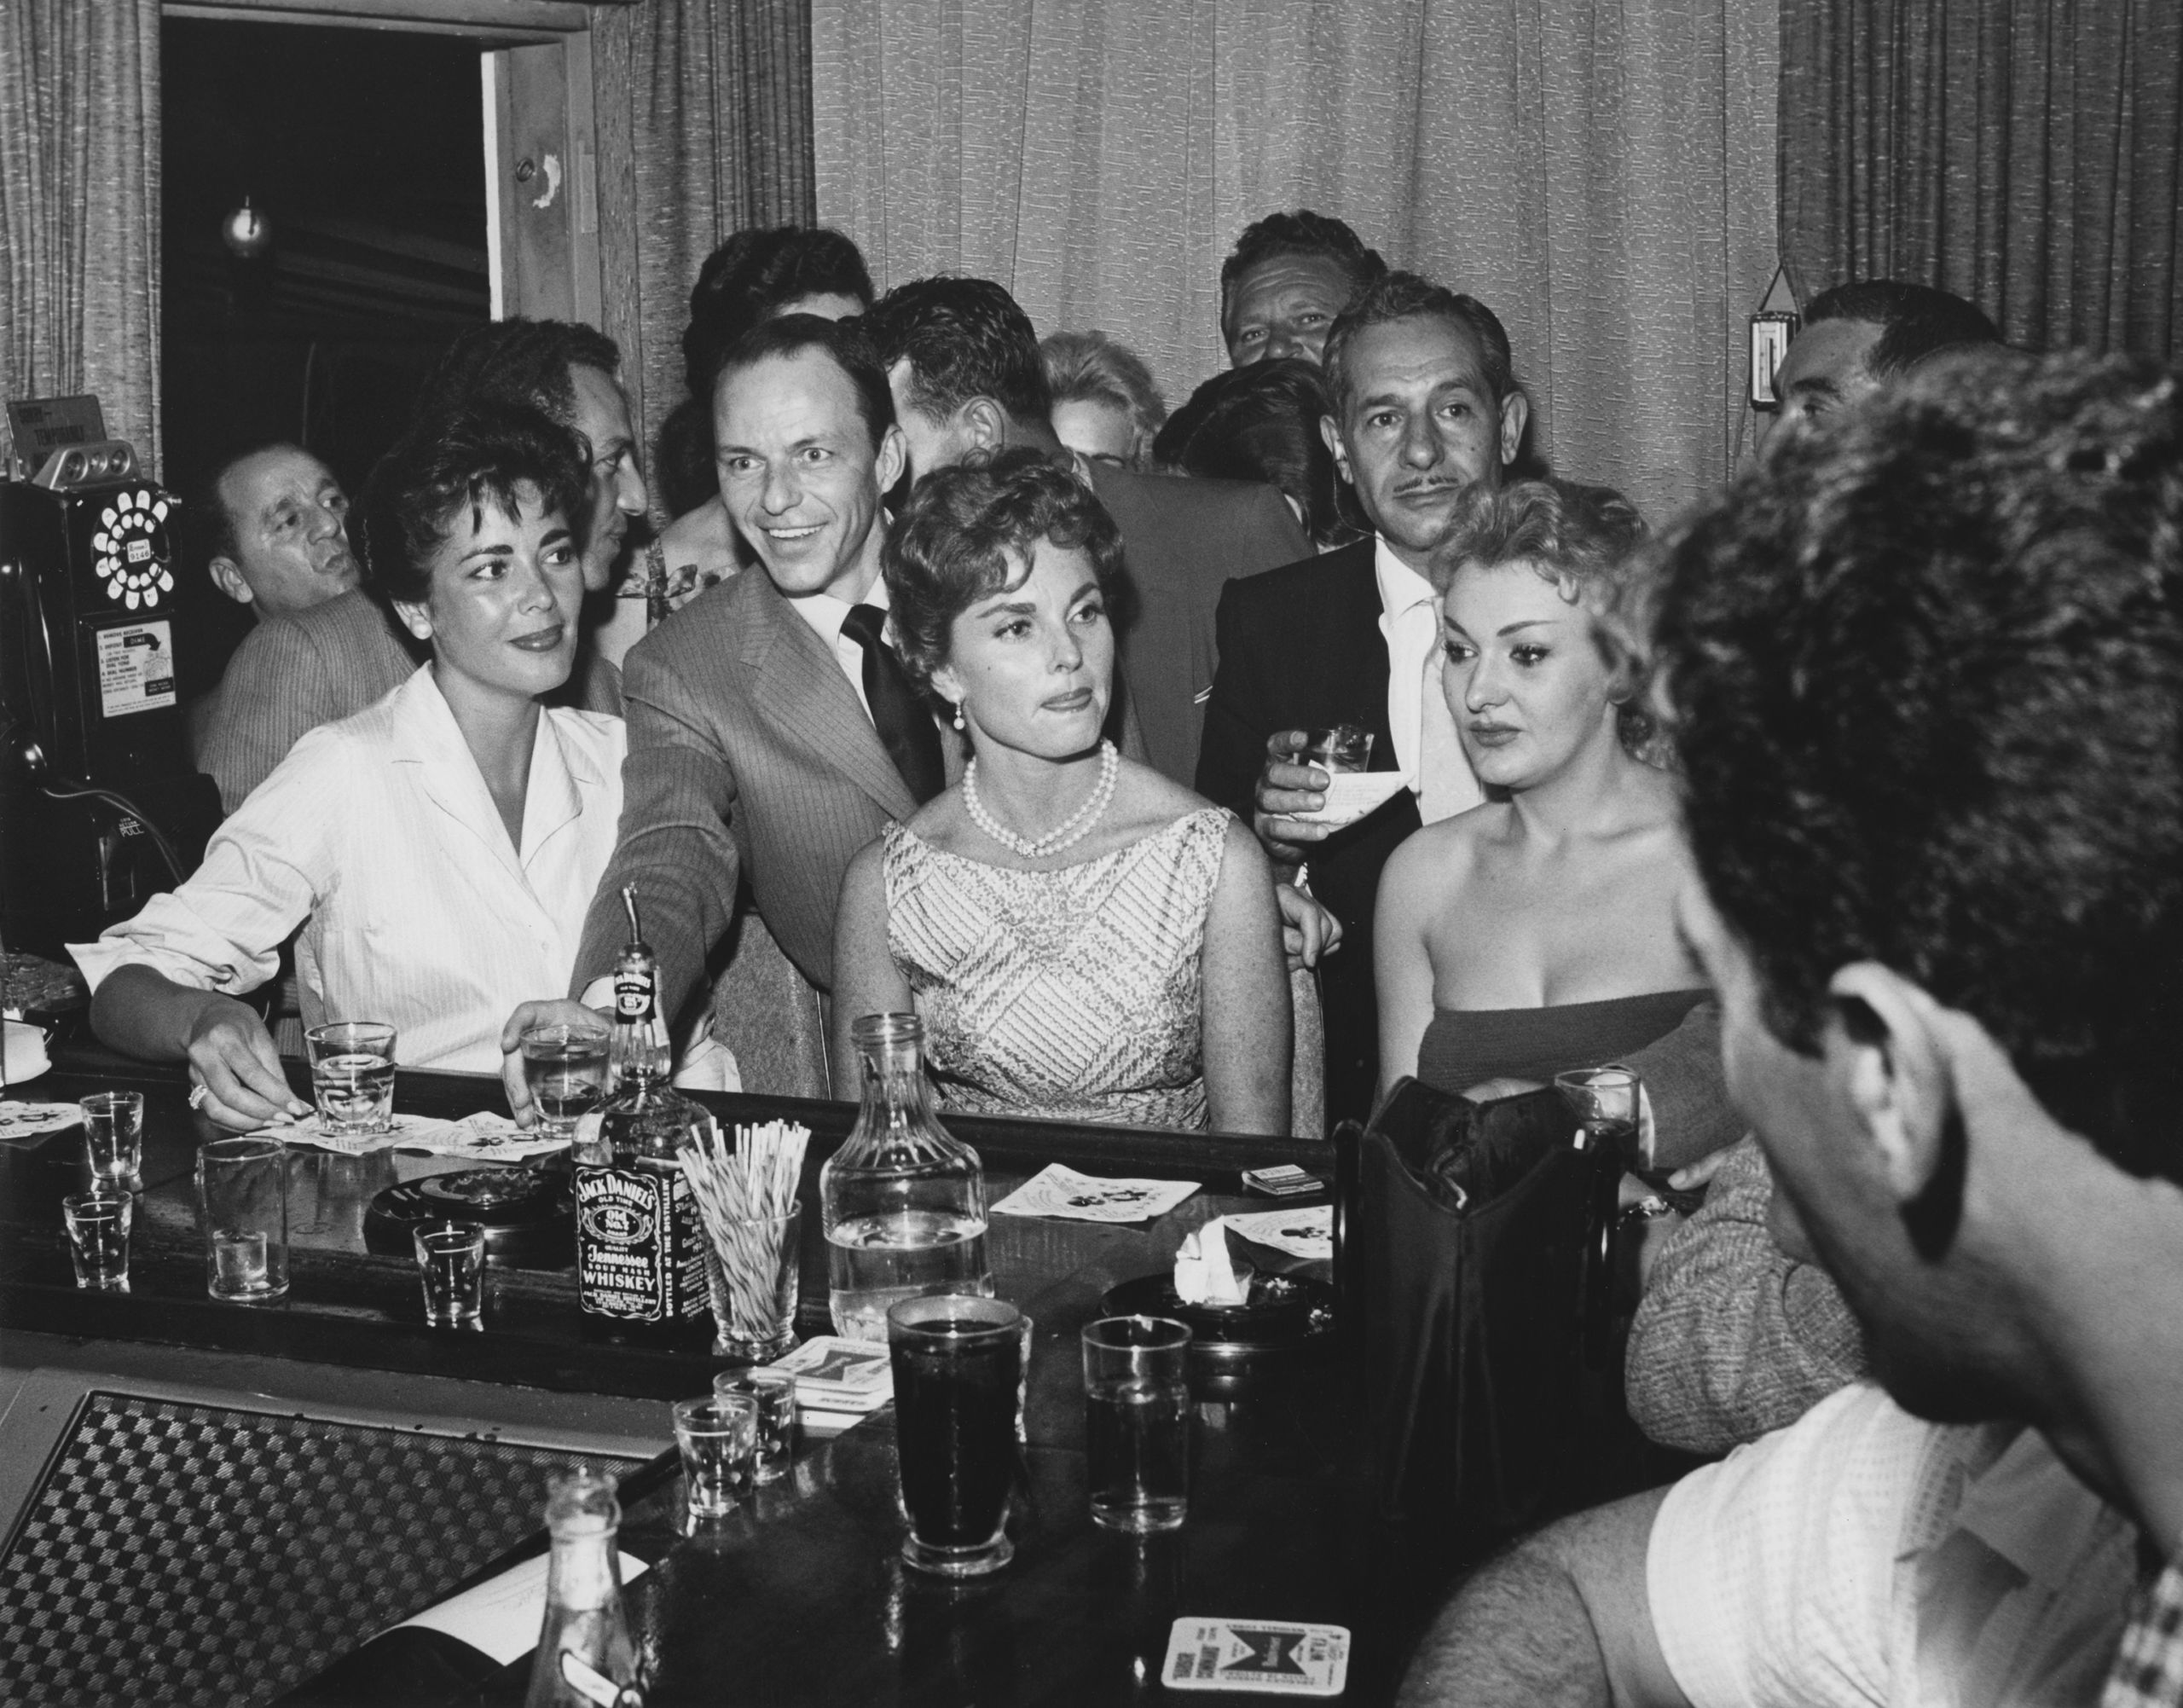 The Marvelous Music History of Miami Beach's Fontainebleau. FS enjoying a cocktail in The Poodle Lounge with Bernice and Ben Novack, the original owners of Fontainebleau. Photo credit: The Estate of Bernice and Ben Novack